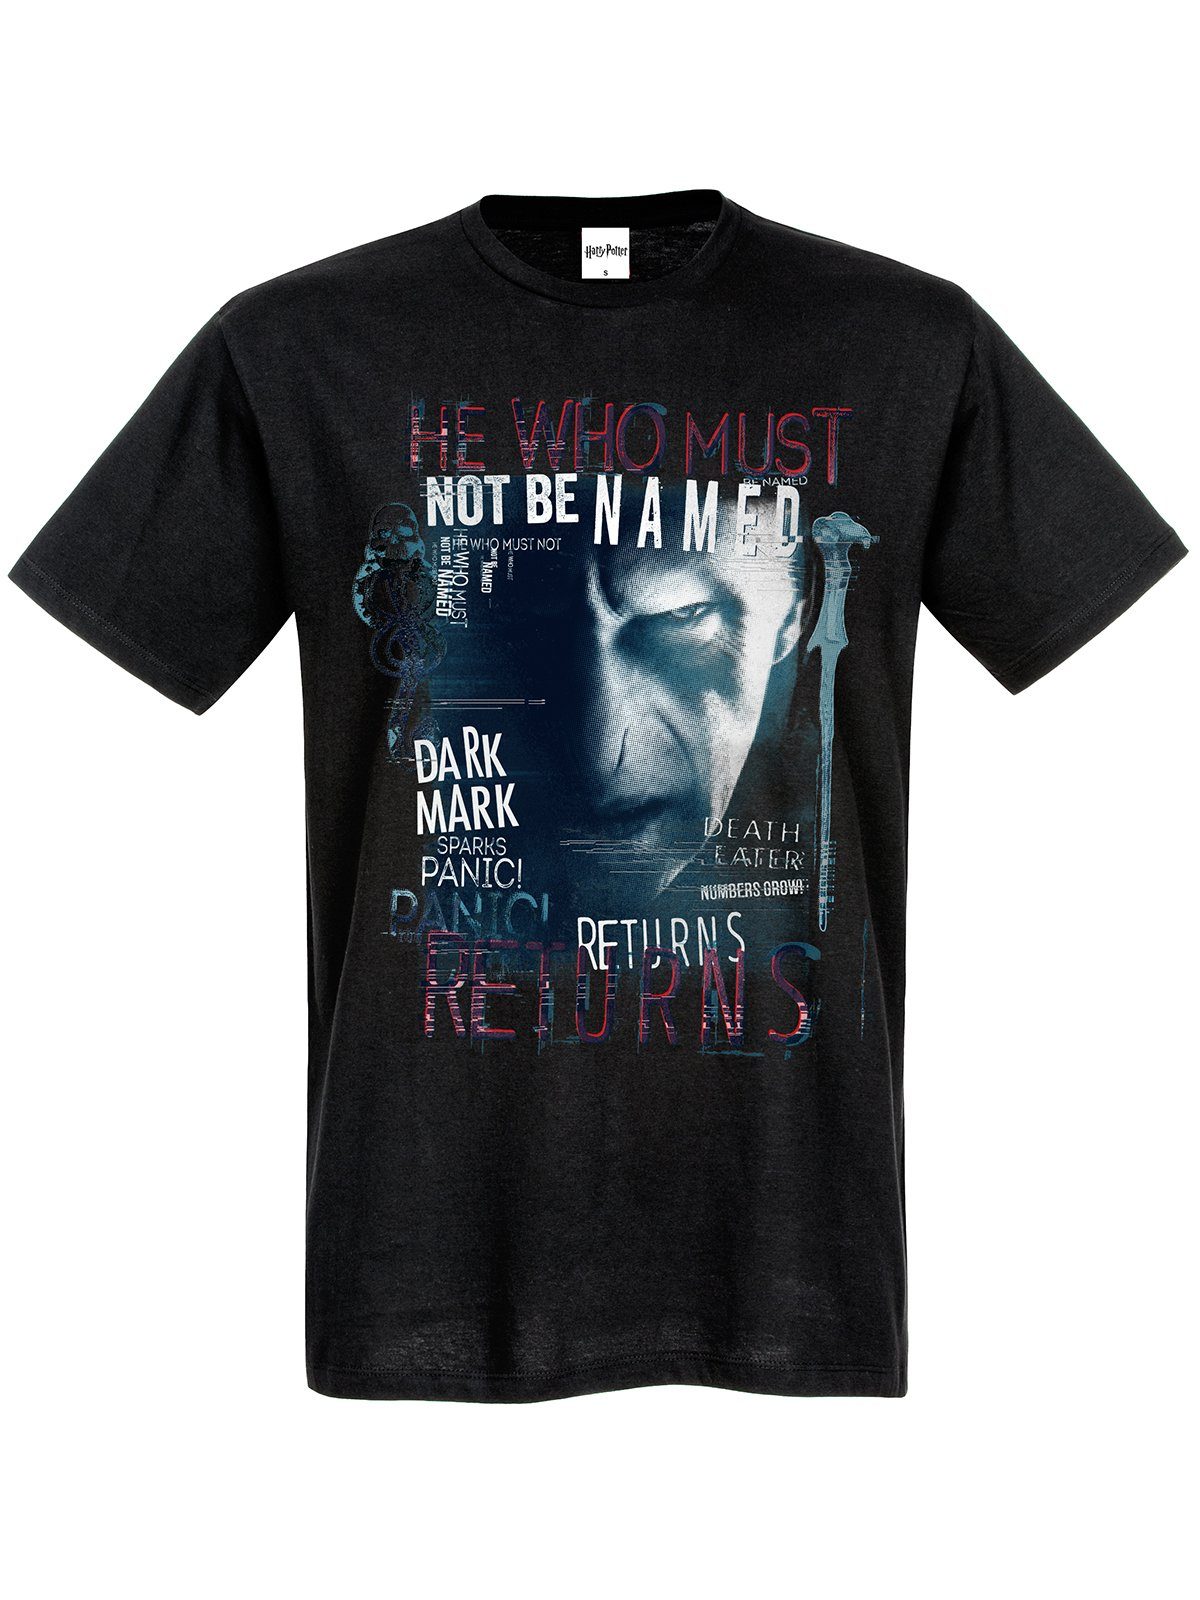 Who Be Potter Harry Must Named Not Warner T-Shirt